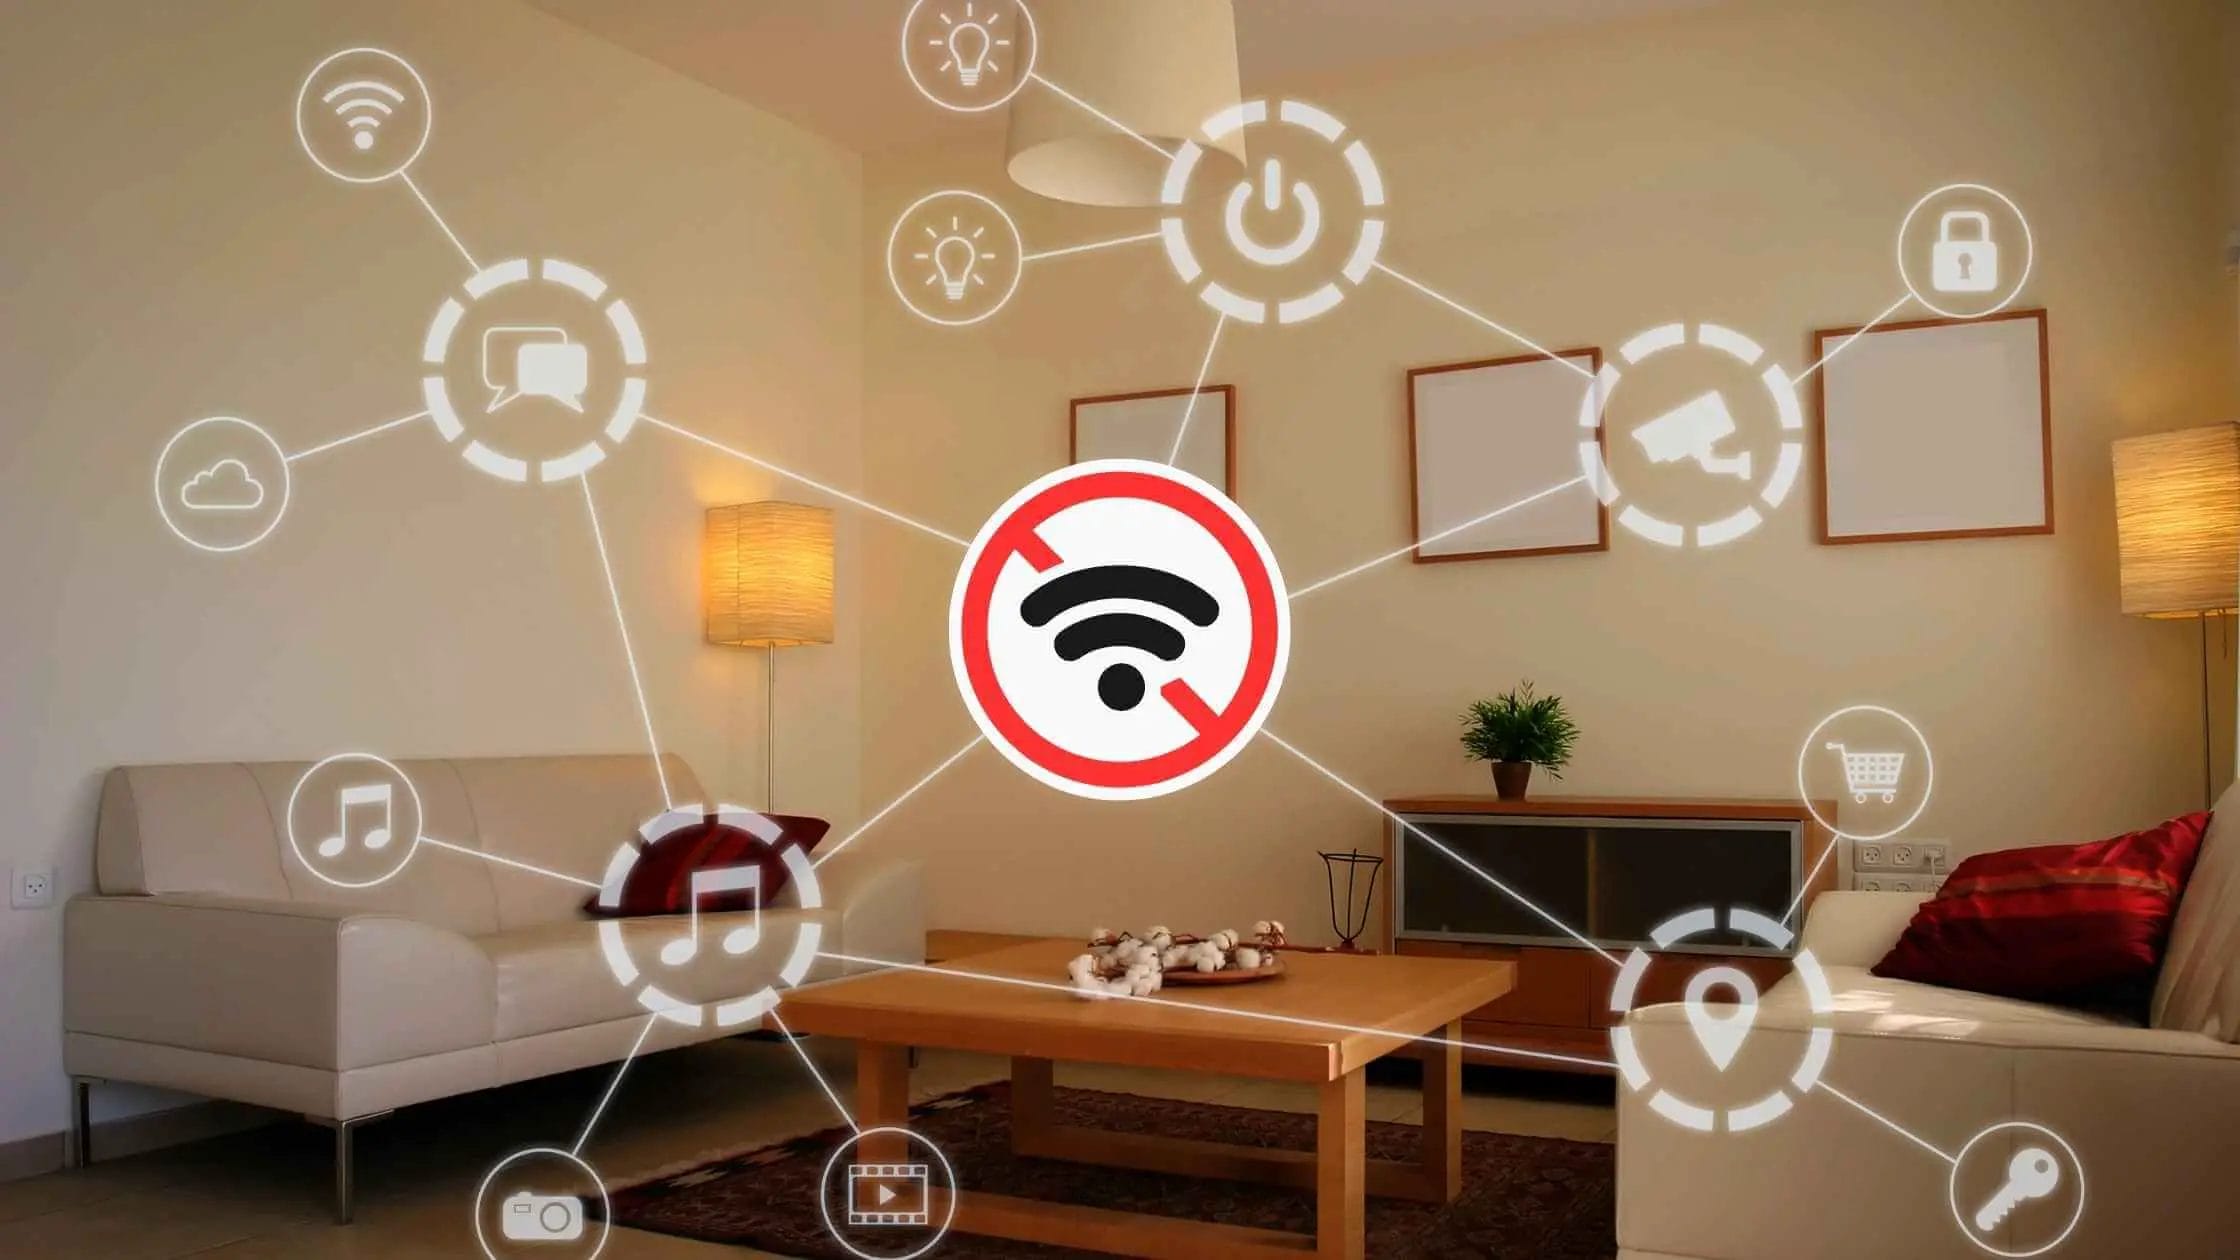 Can I Have a Smart Home Without Internet